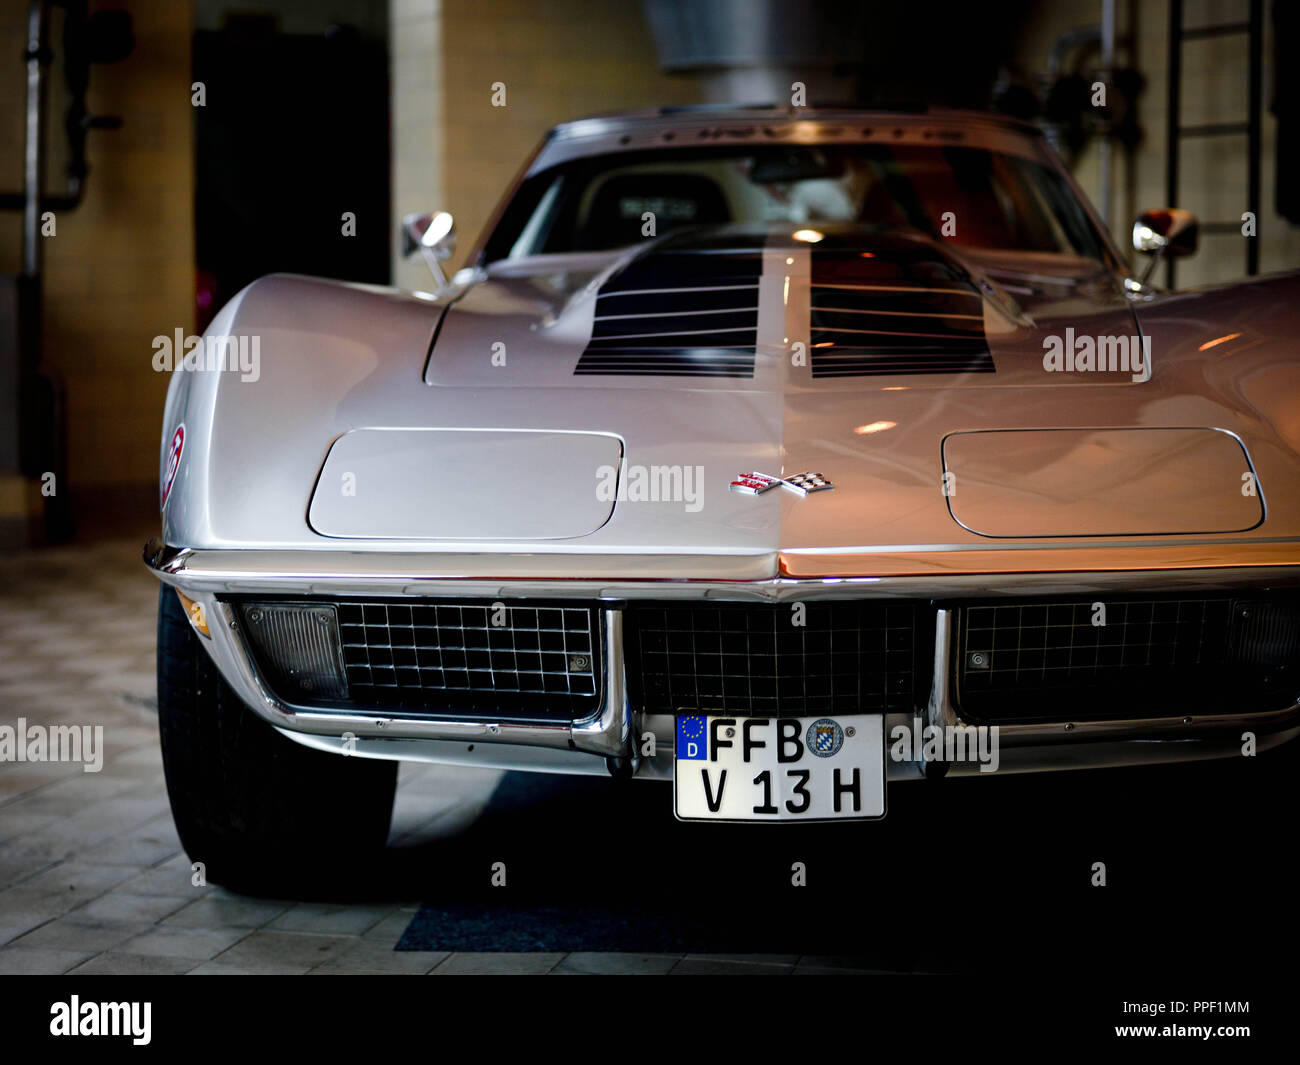 Christian Förster offers assisted parking for vintage cars in Germering, Germany. Front view of a Corvette Stingray Stock Photo